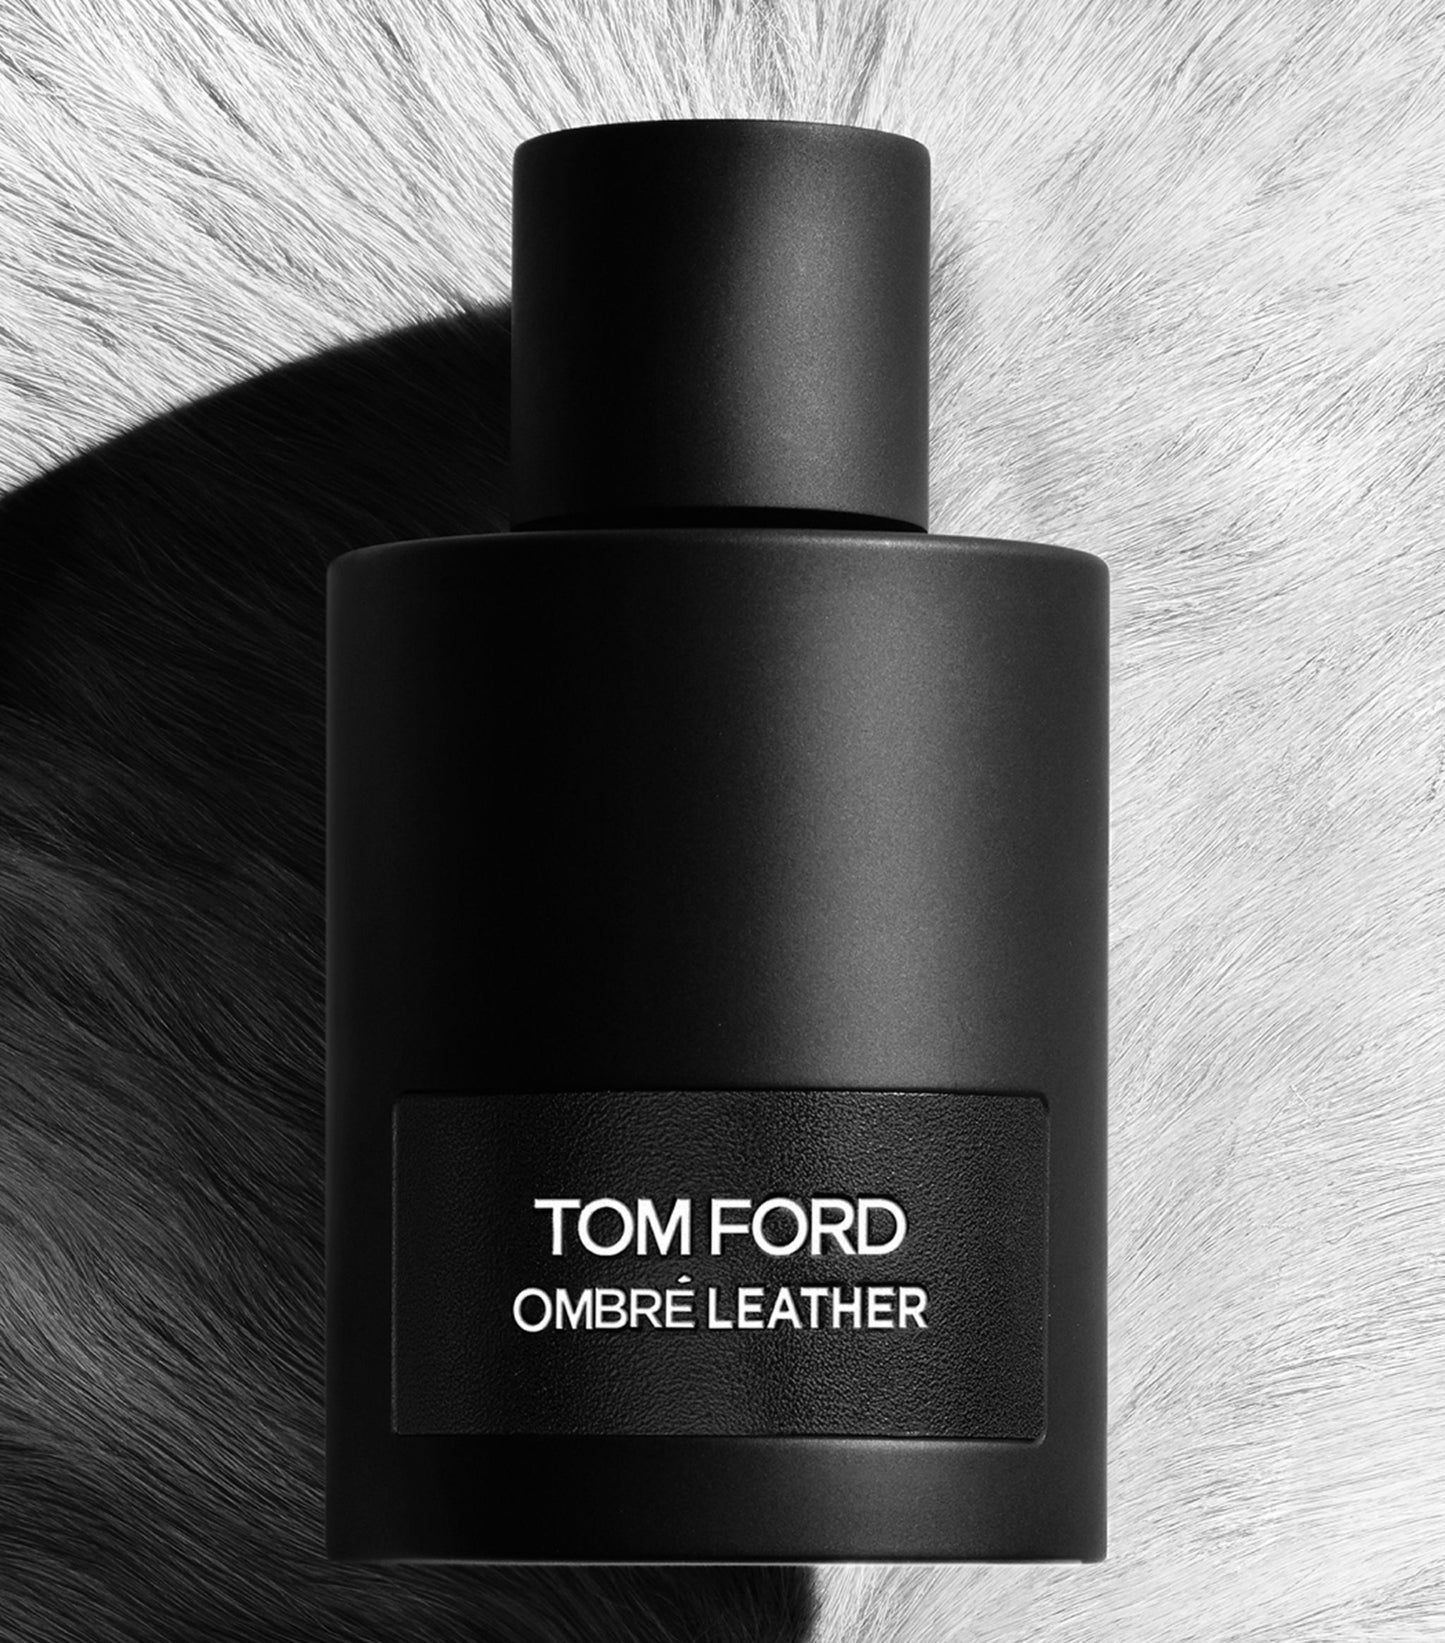 Ombre Leather Parfum | Tom Ford Leather Parfum | Fragrance Samples|Perfume samples